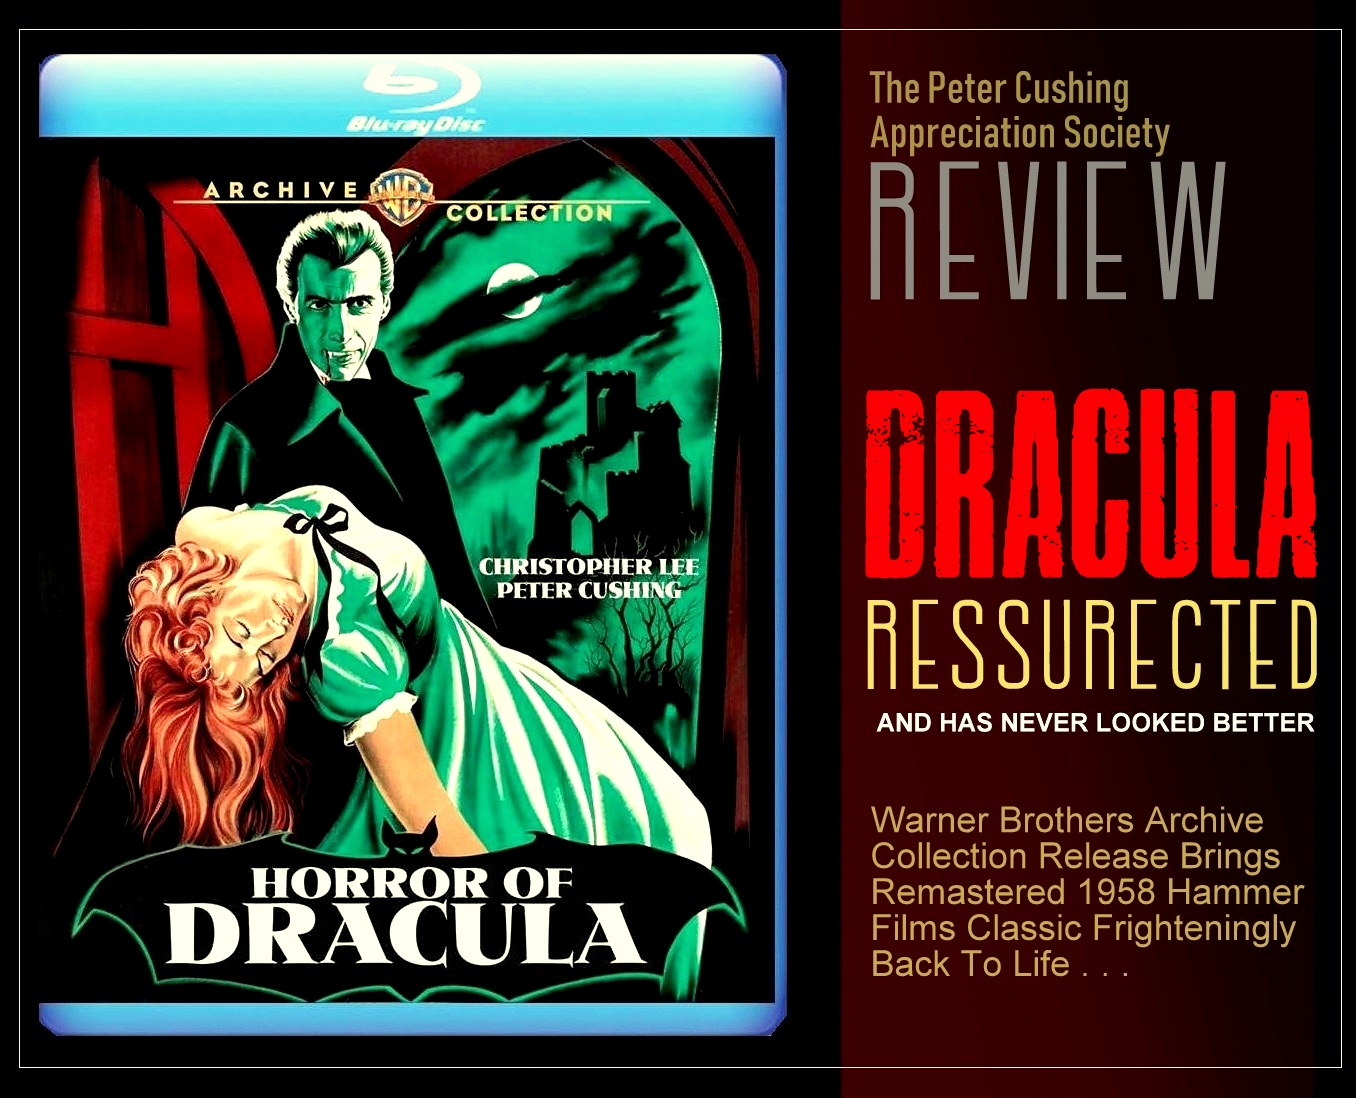 A FULL REVIEW OF WARNER BROS ARCHIVES HORROR OF DRACULA RESURRECTED REMASTERED BLU RAY